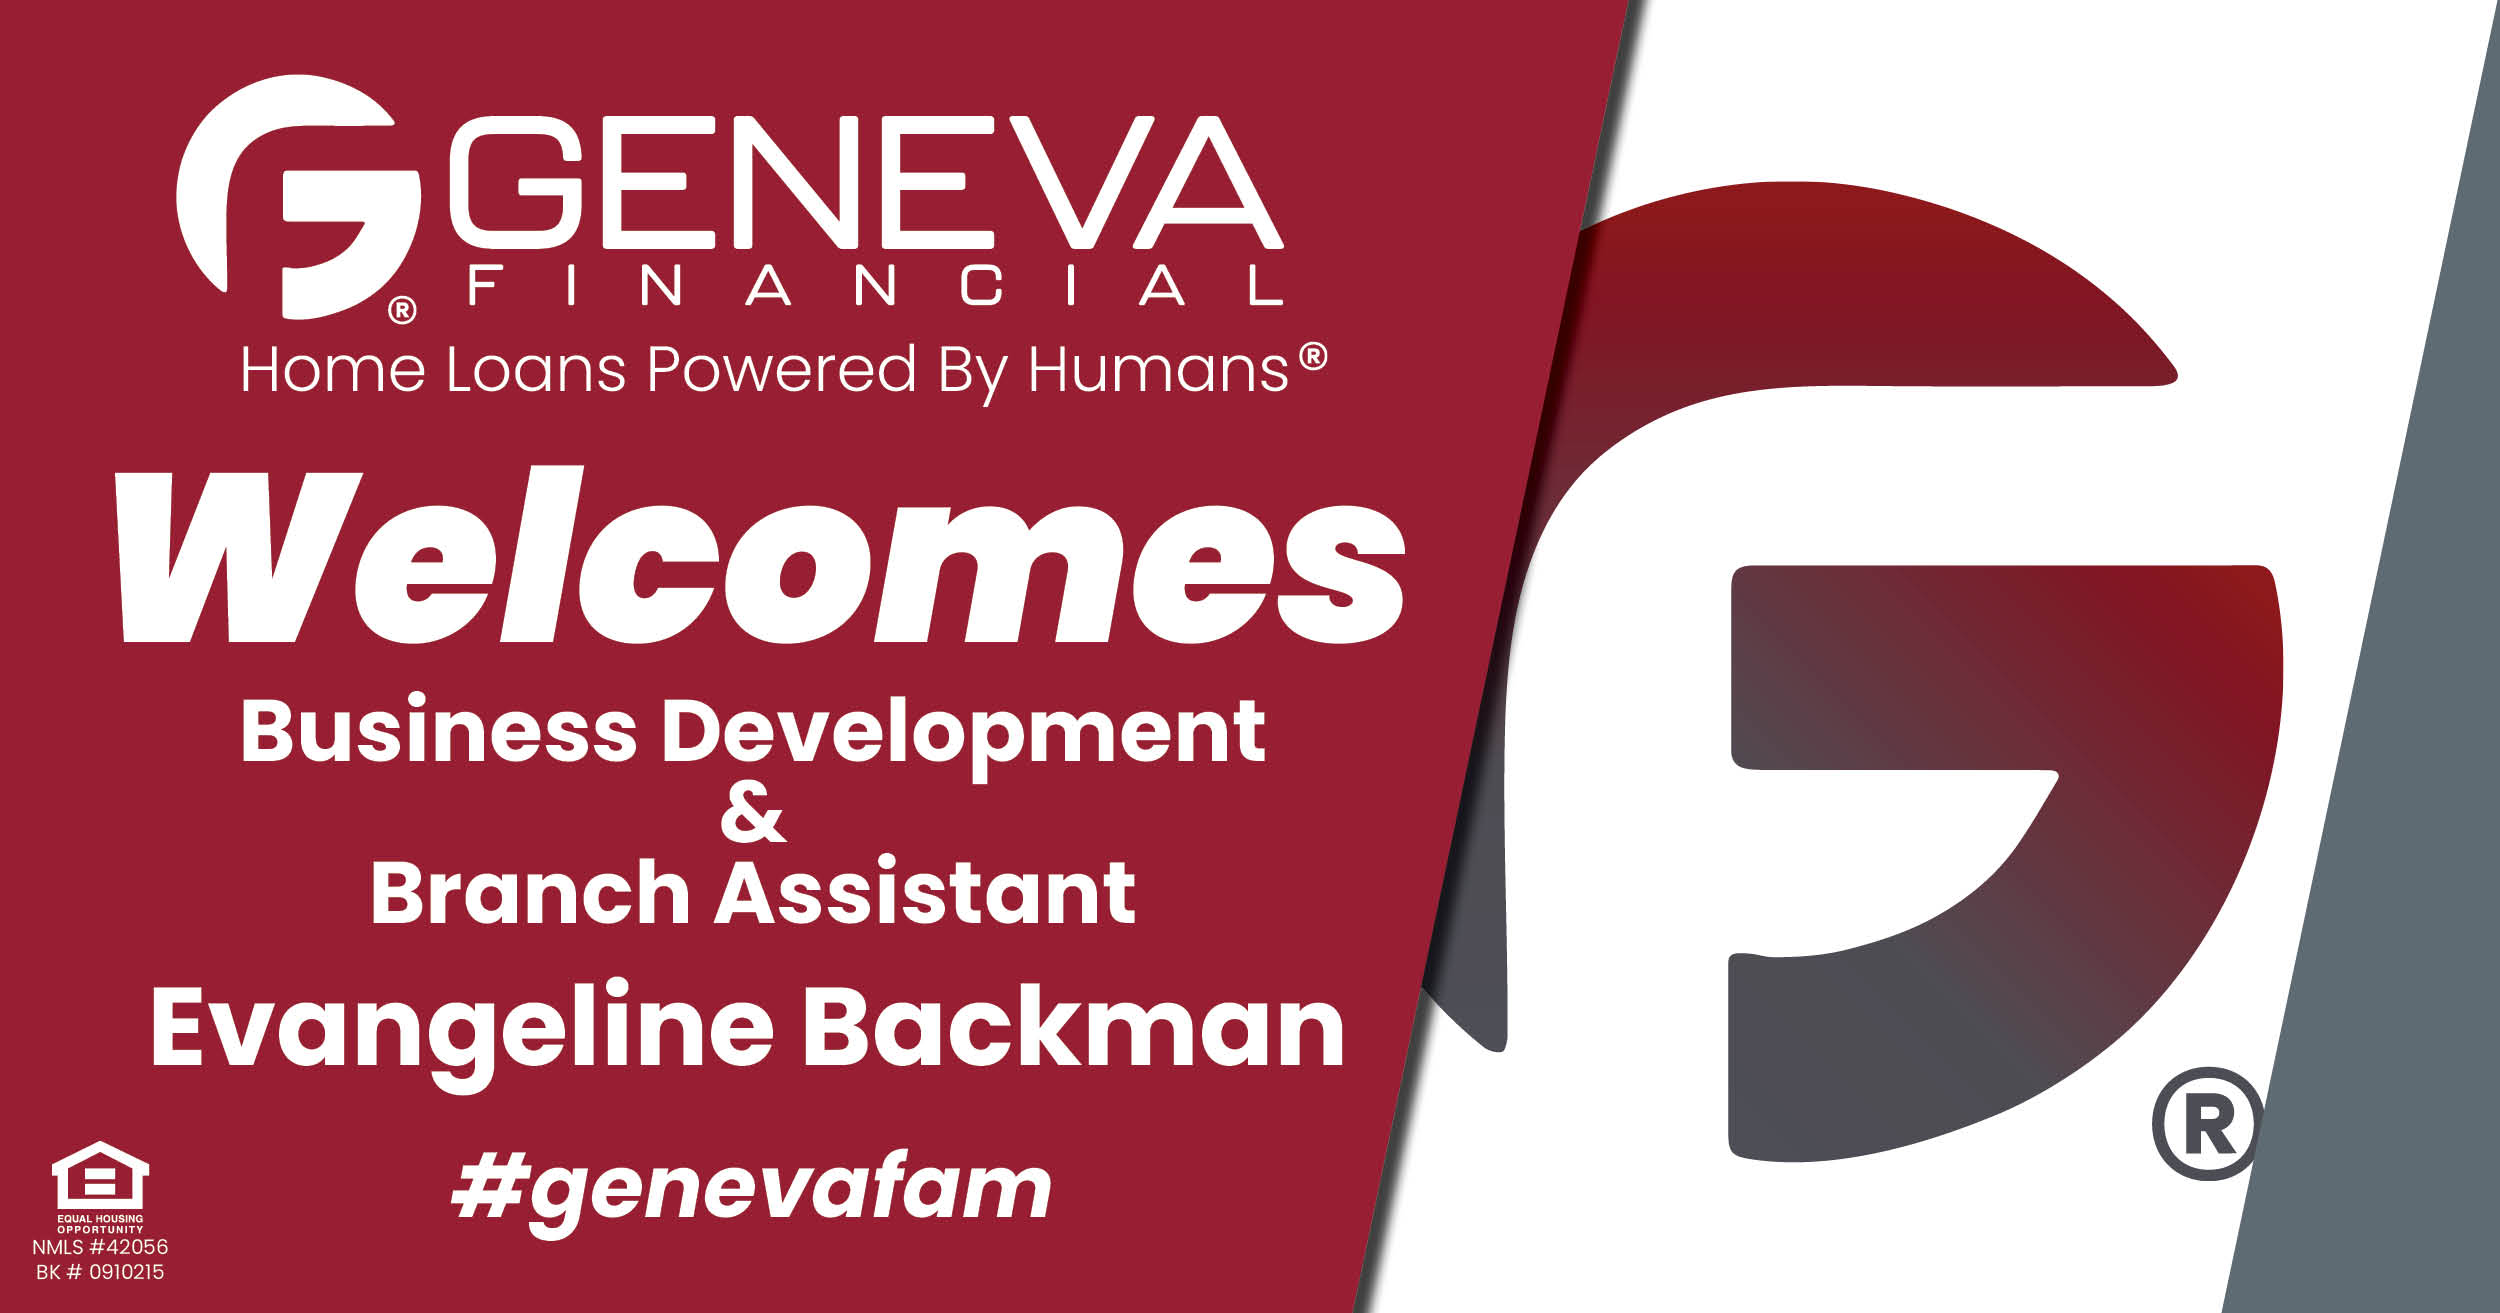 Geneva Financial Welcomes New Business Development and Branch Assistant Evangeline Backman to Salem, OR – Home Loans Powered by Humans®.